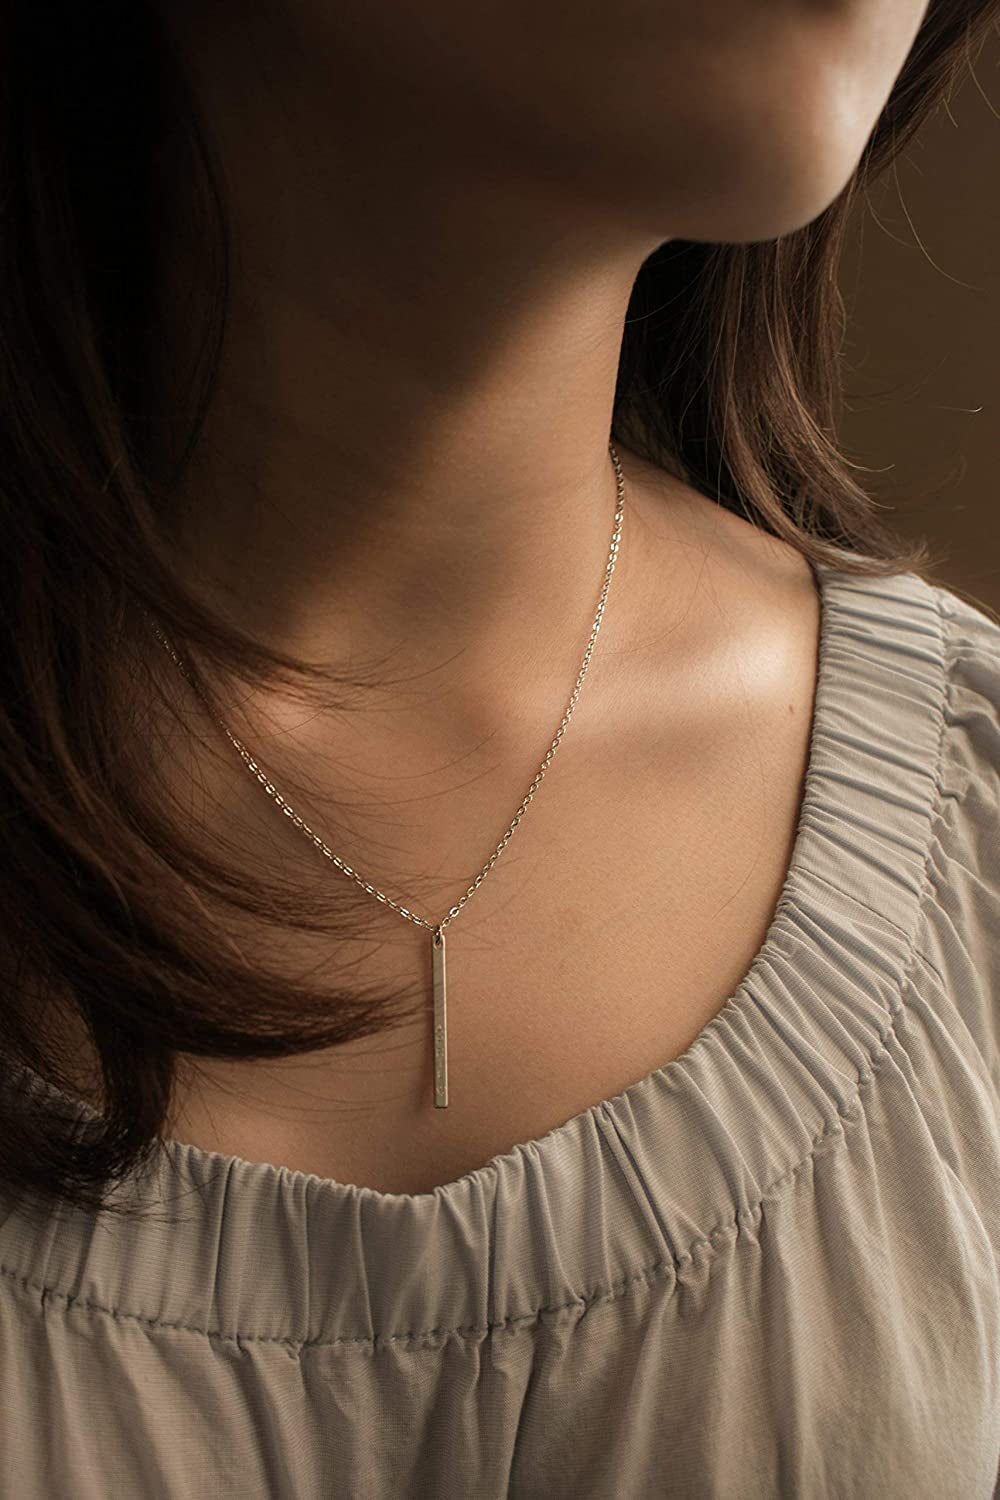 Minimalist Vertical Name Necklace - 16K Silver, Gold plated